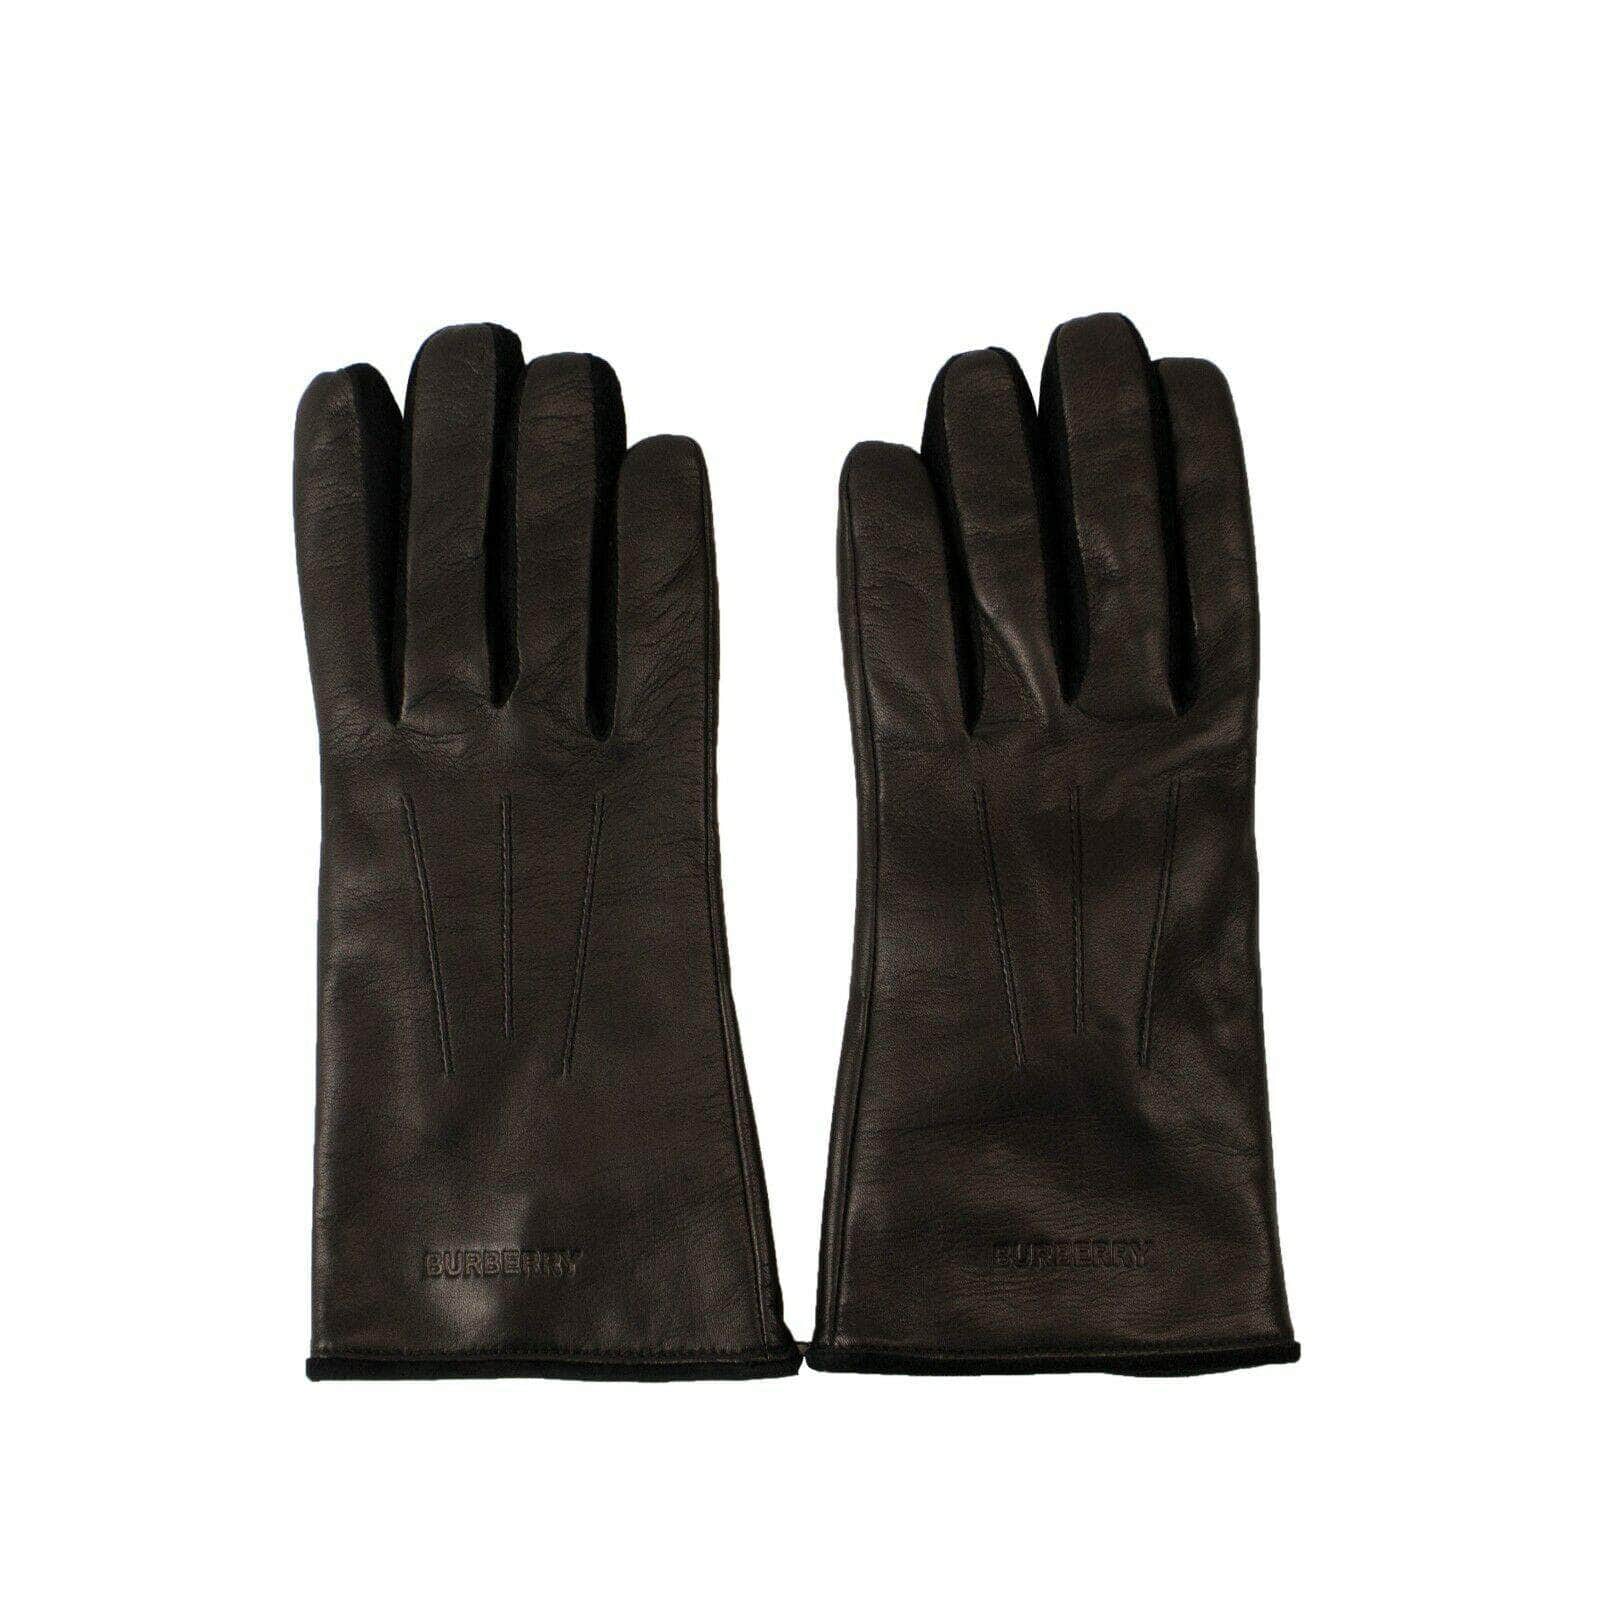 Burberry 250-500, burberry, couponcollection, do-not-use-womens-accessories, gender-womens, main-accessories, size-8, size-8-5, size-9, size-9-5 Black Leather Gloves